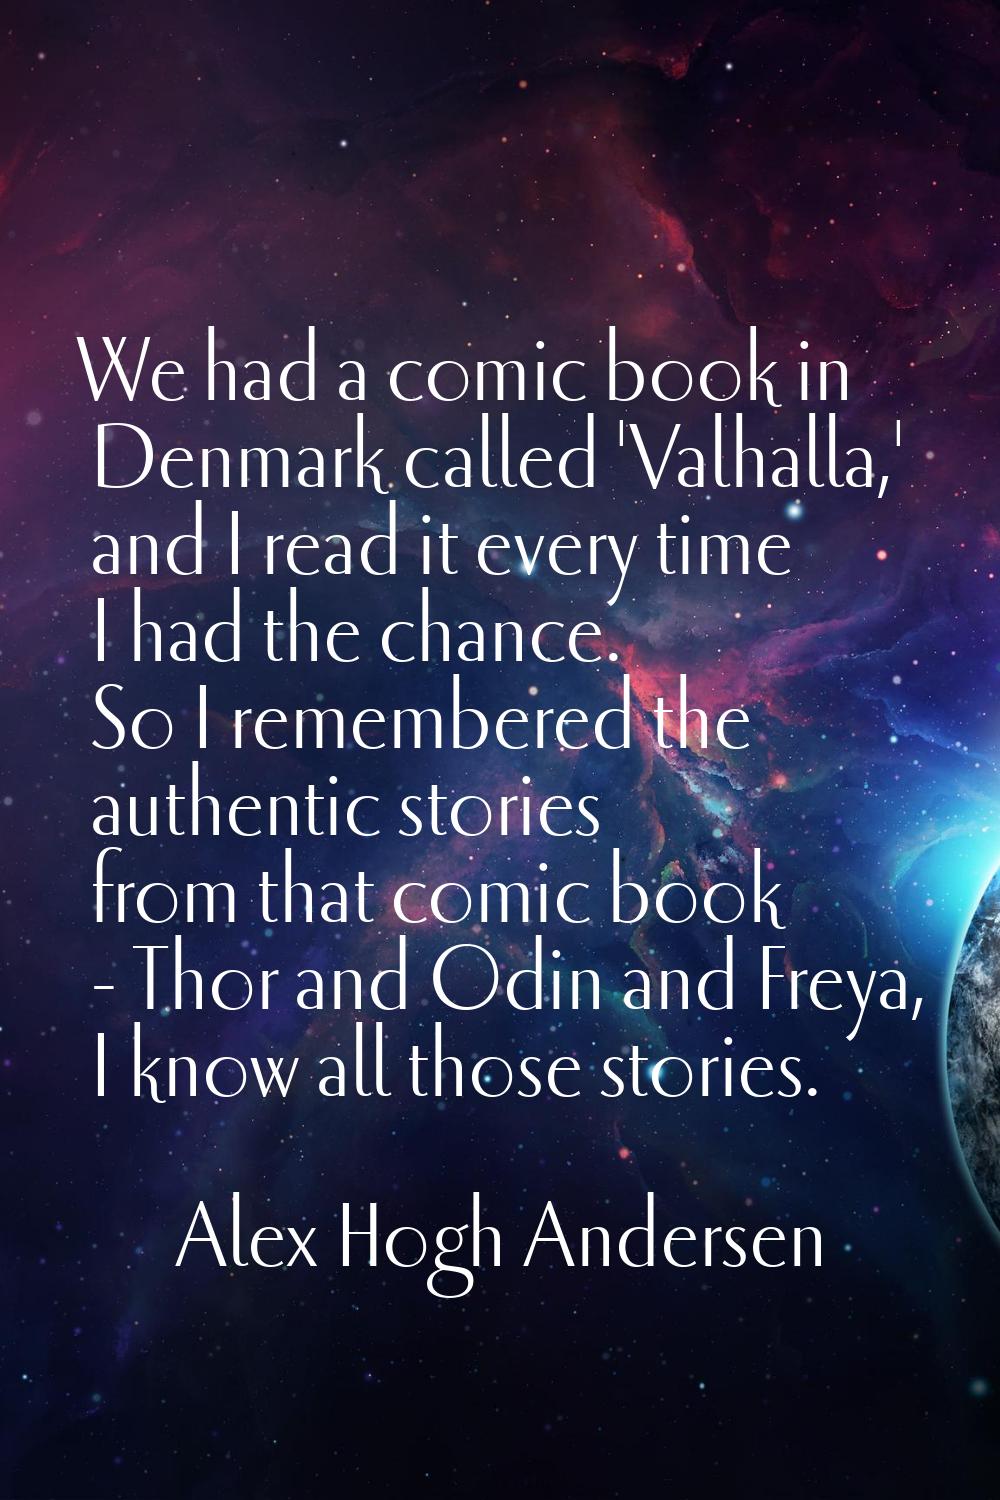 We had a comic book in Denmark called 'Valhalla,' and I read it every time I had the chance. So I r